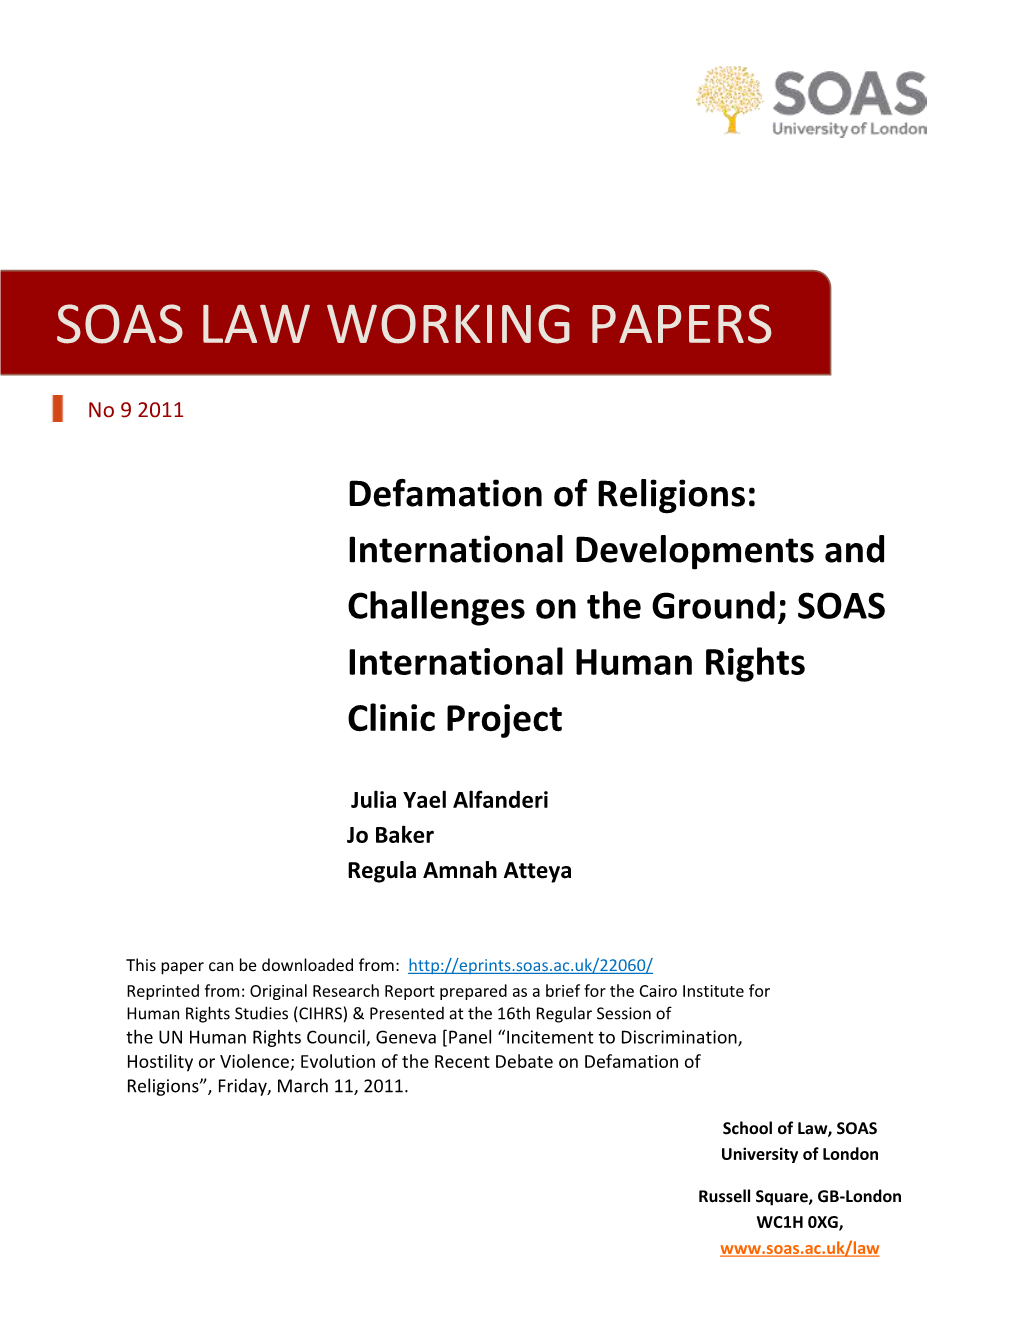 Defamation of Religions: International Developments and Challenges on the Ground; SOAS